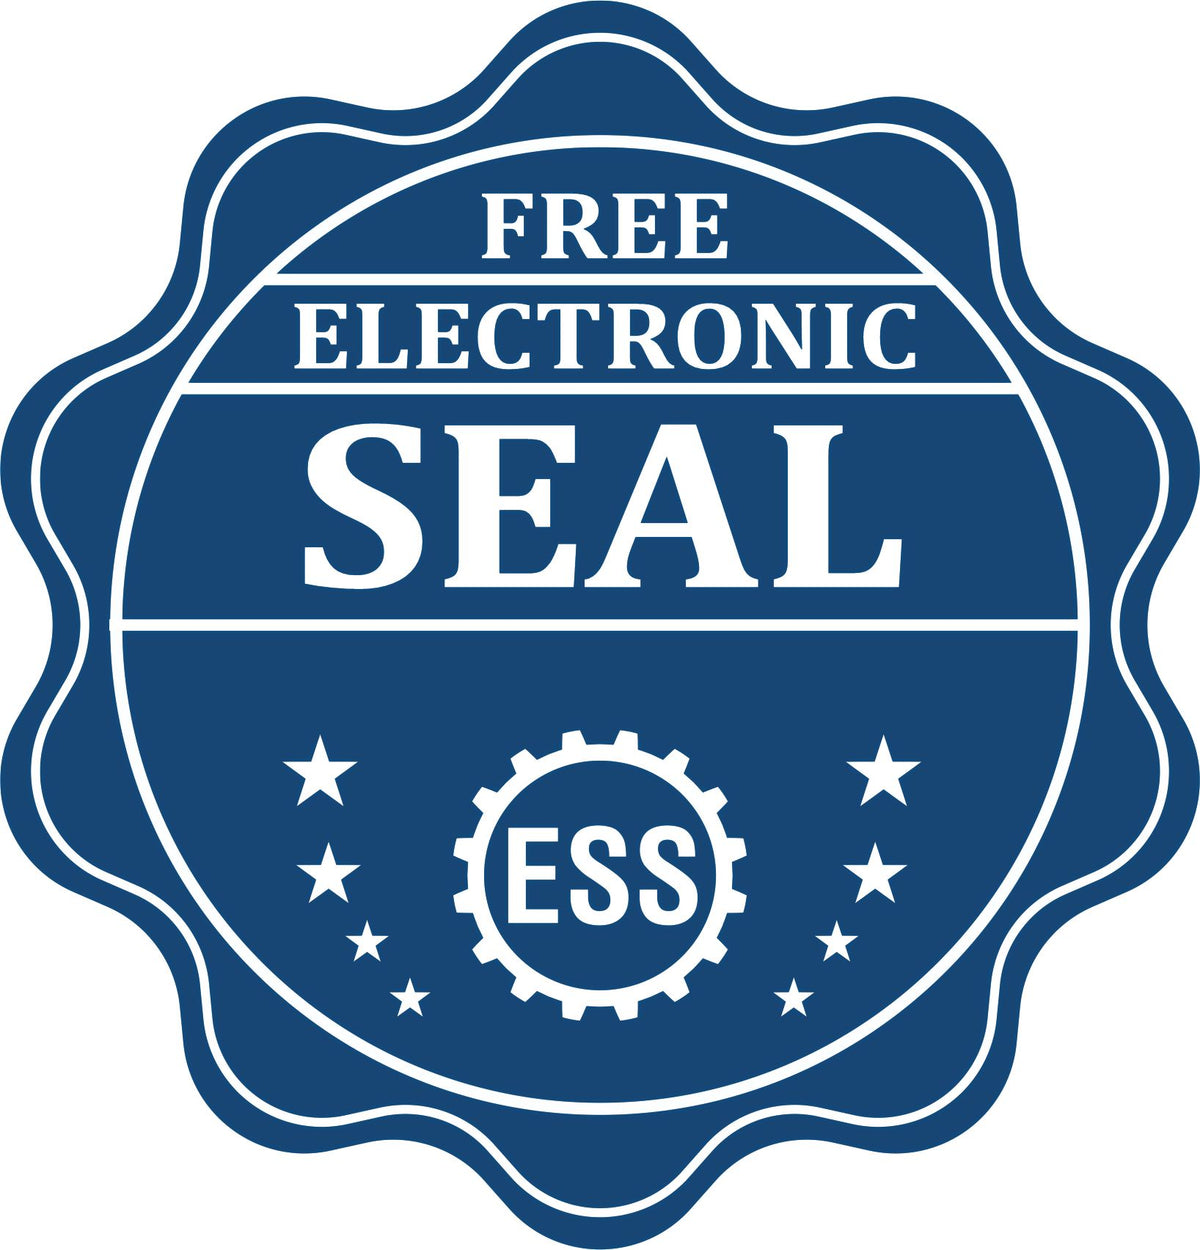 A badge showing a free electronic seal for the Super Slim Kansas Notary Public Stamp with stars and the ESS gear on the emblem.